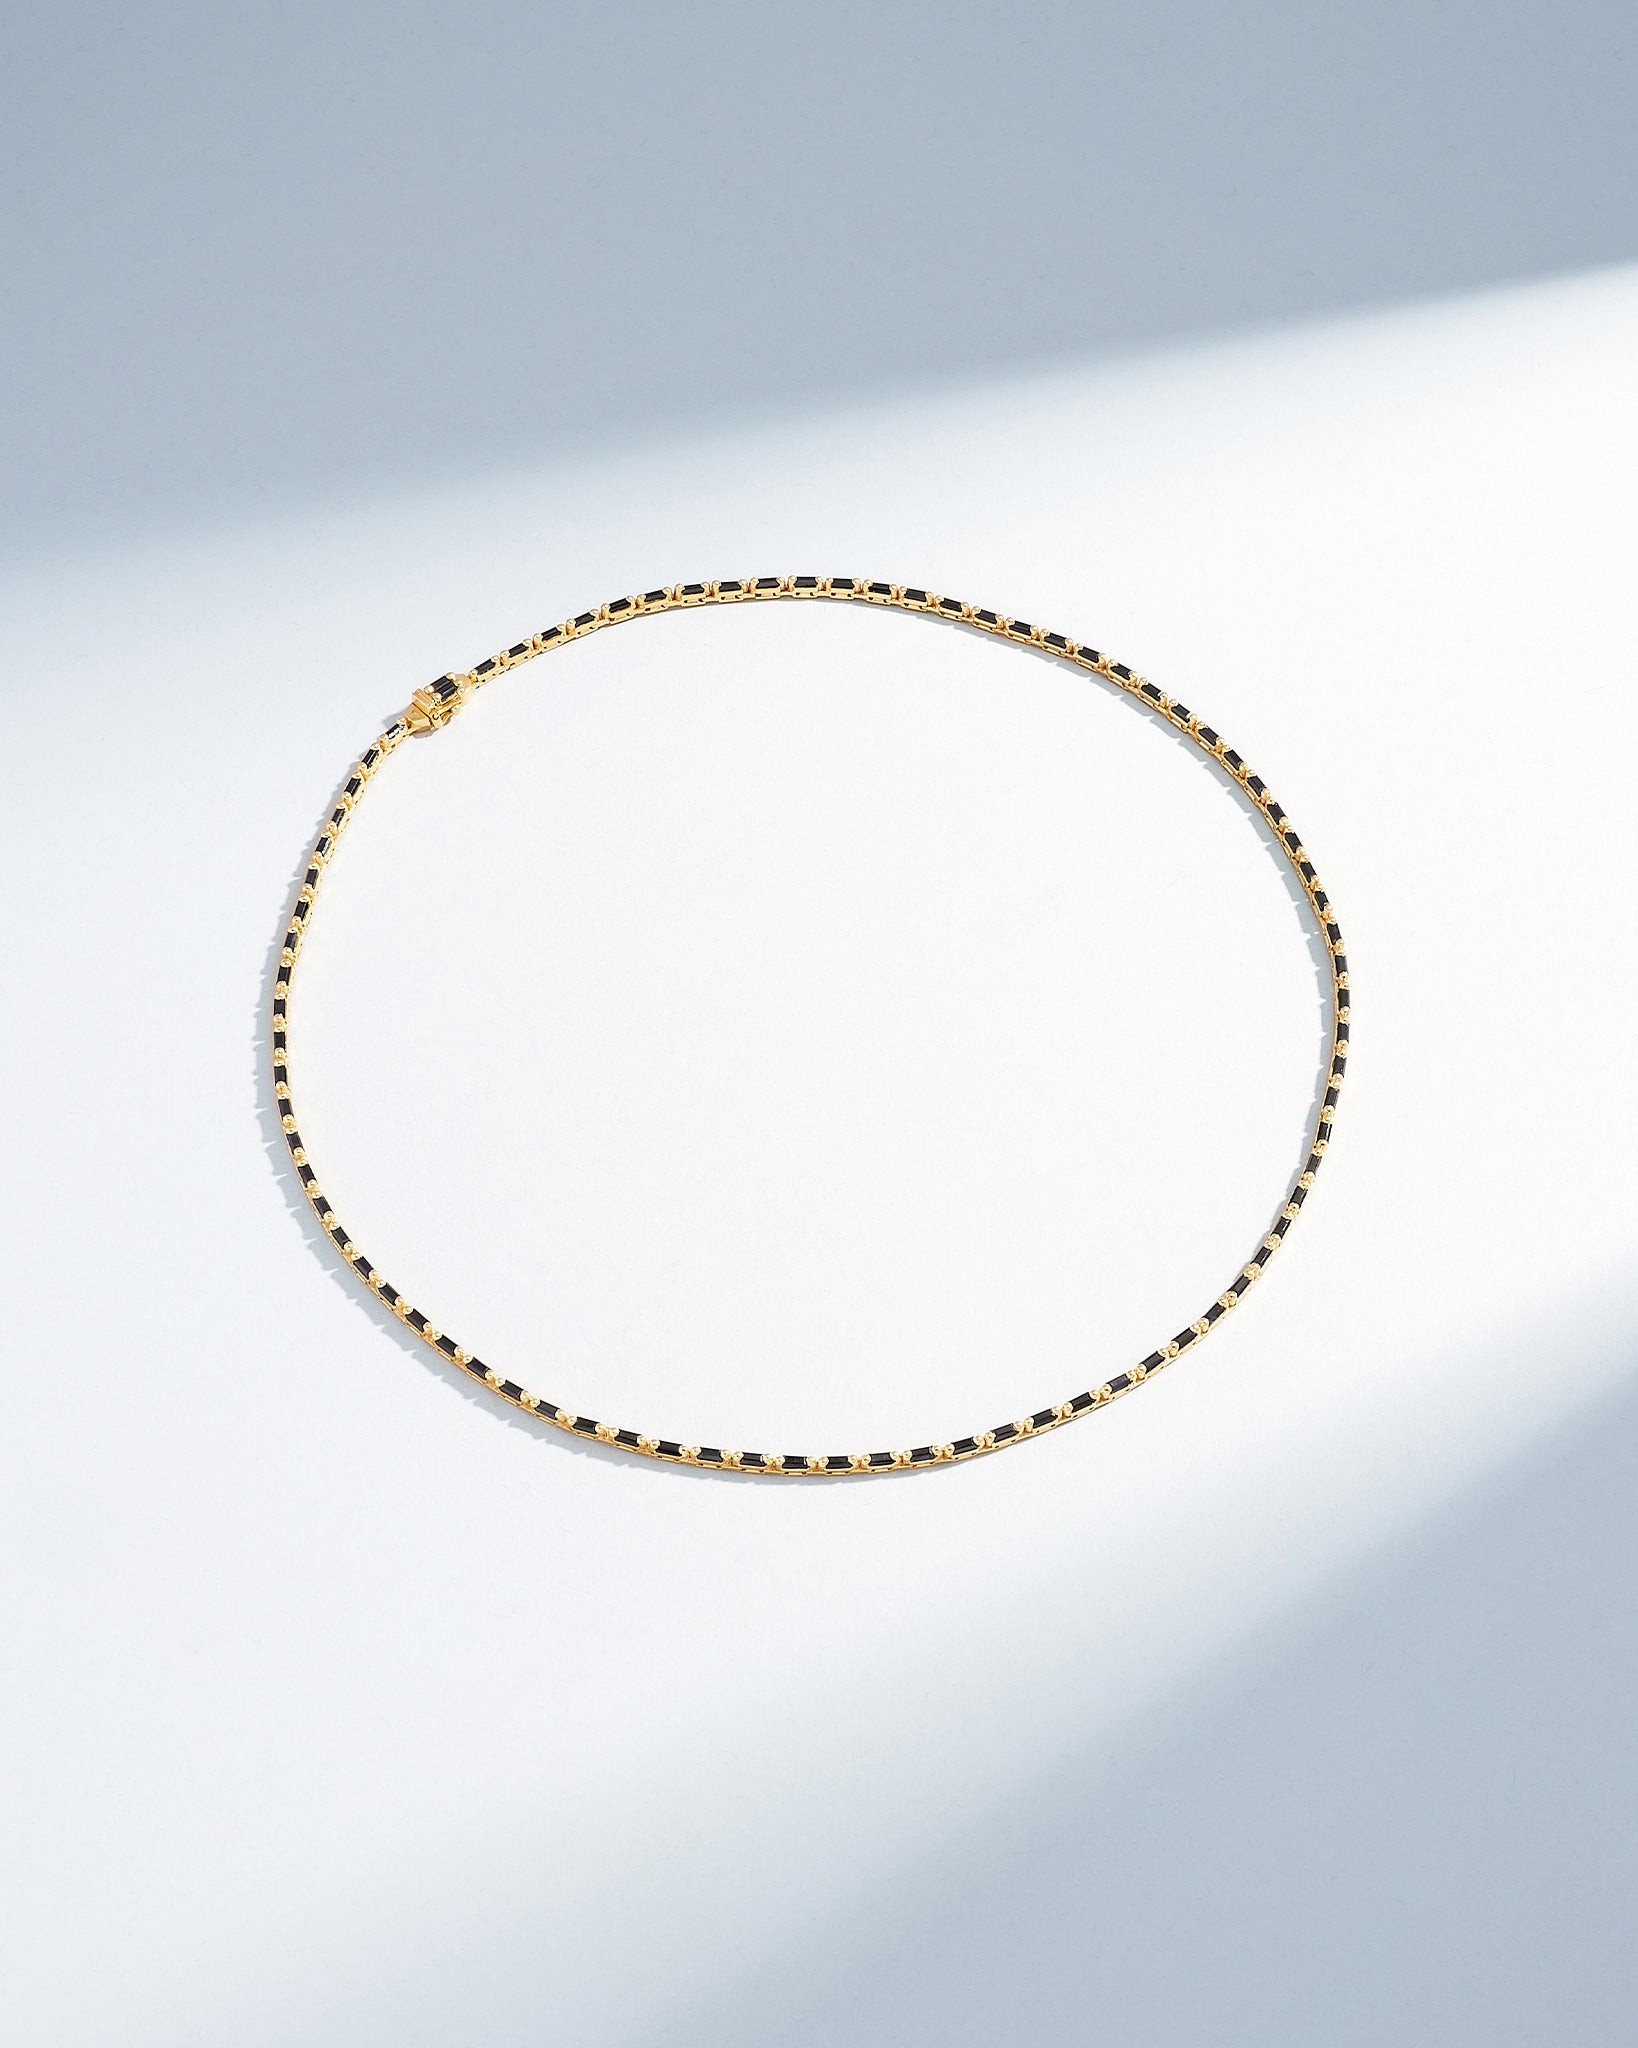 Suzanne Kalan Linear Full Black Sapphire Tennis Necklace in 18k yellow gold